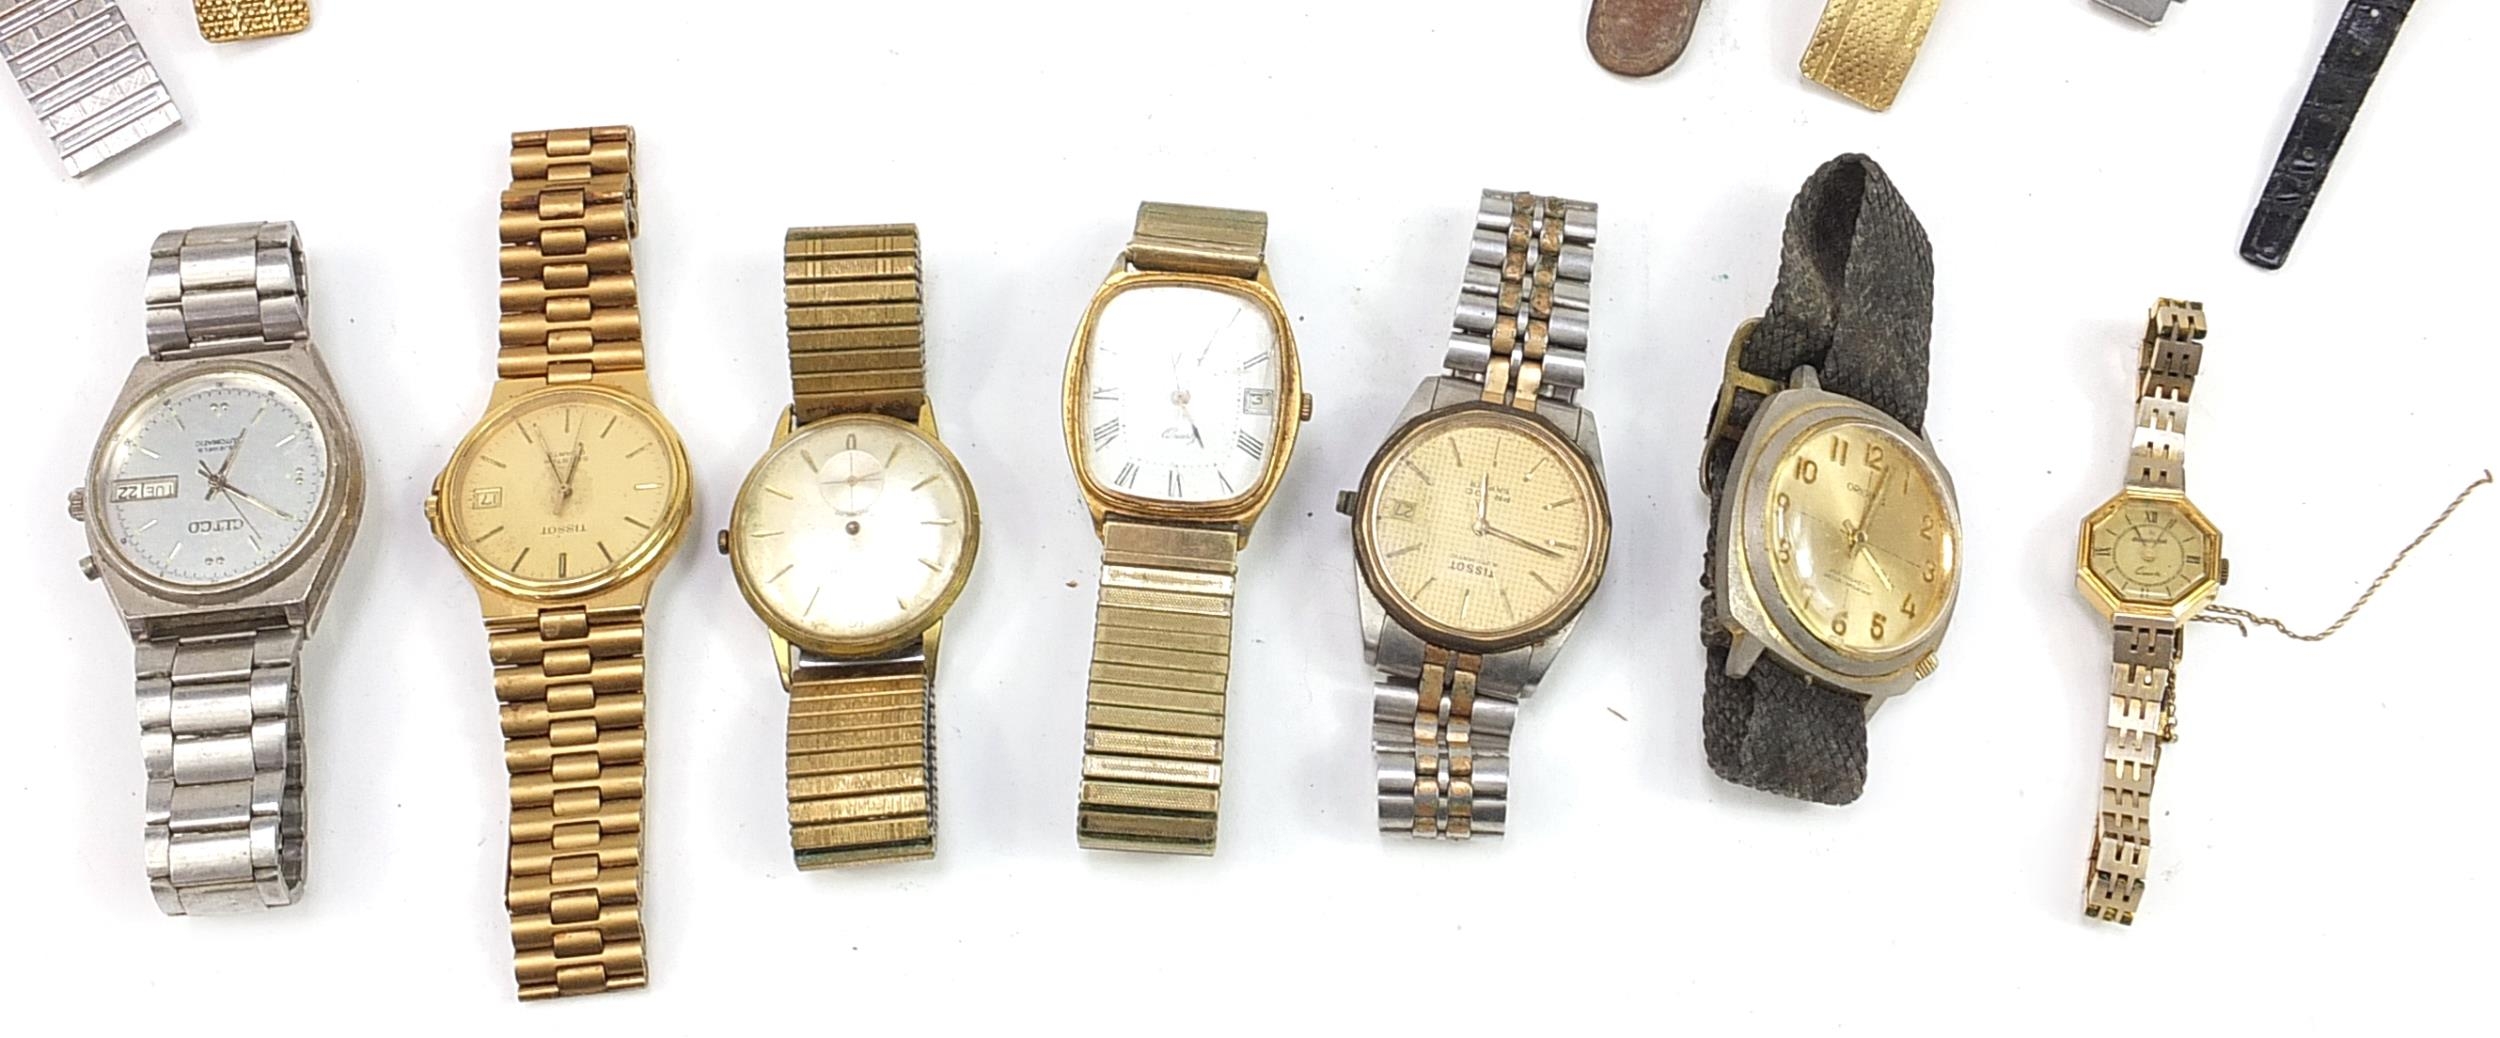 Collection of vintage and later ladies and gentlemen's wristwatches including Sekonda, Accurist, - Image 4 of 4